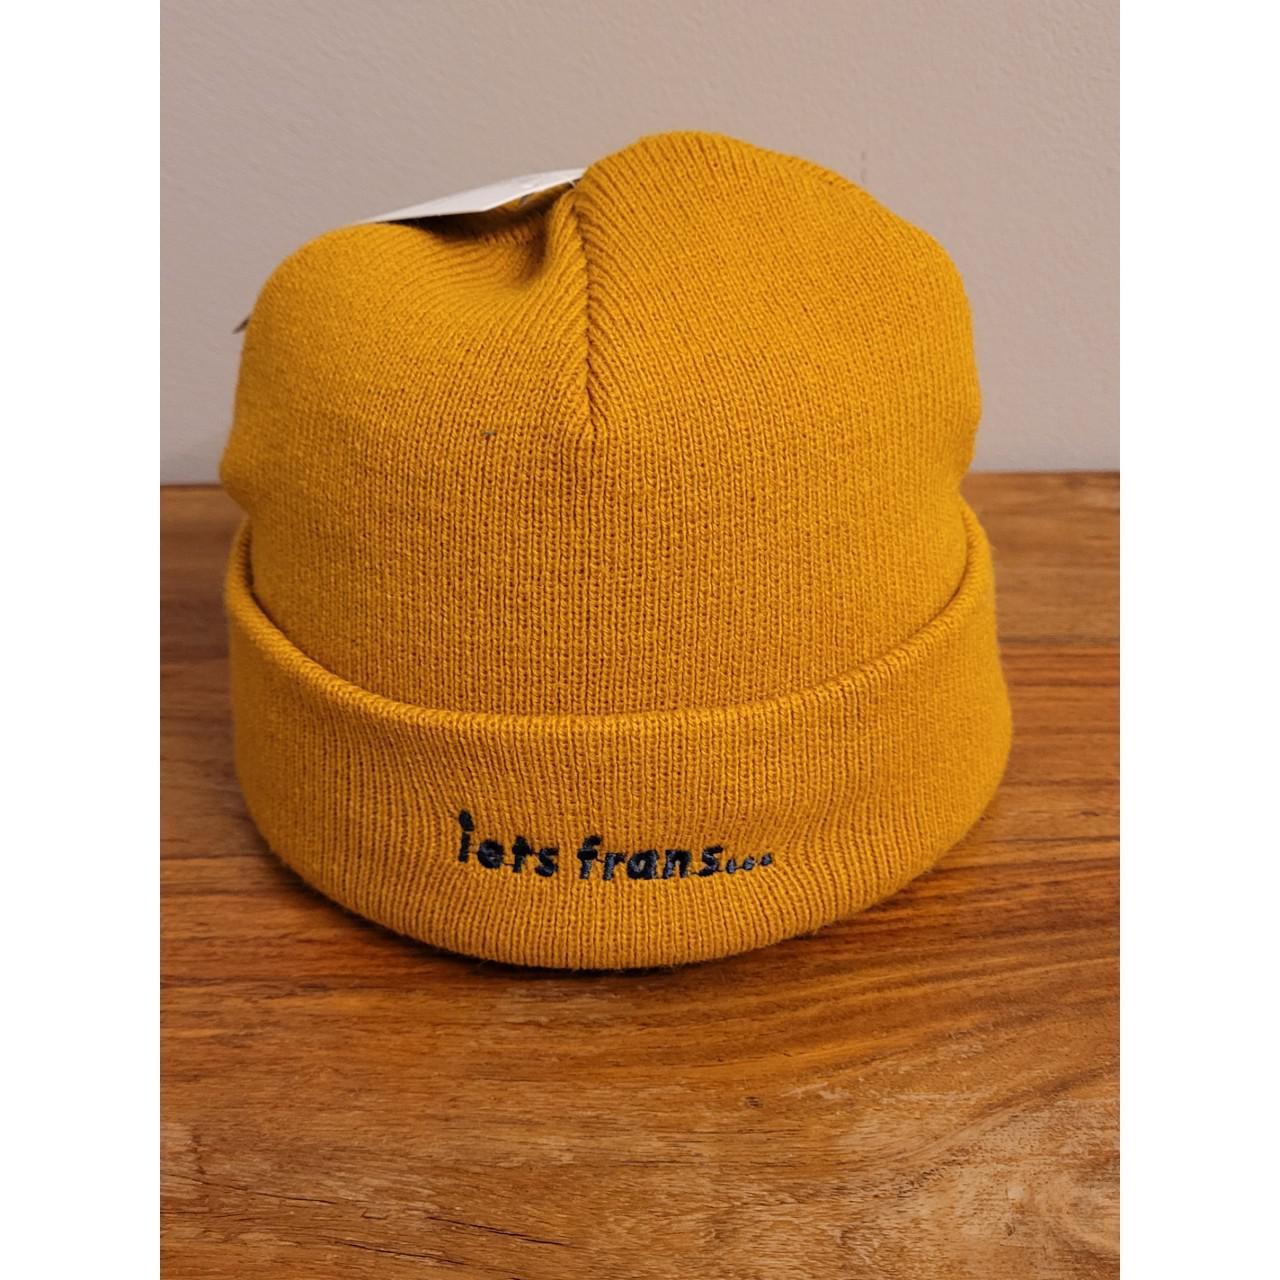 Urban Outfitters Women's Yellow and Black Hat (3)